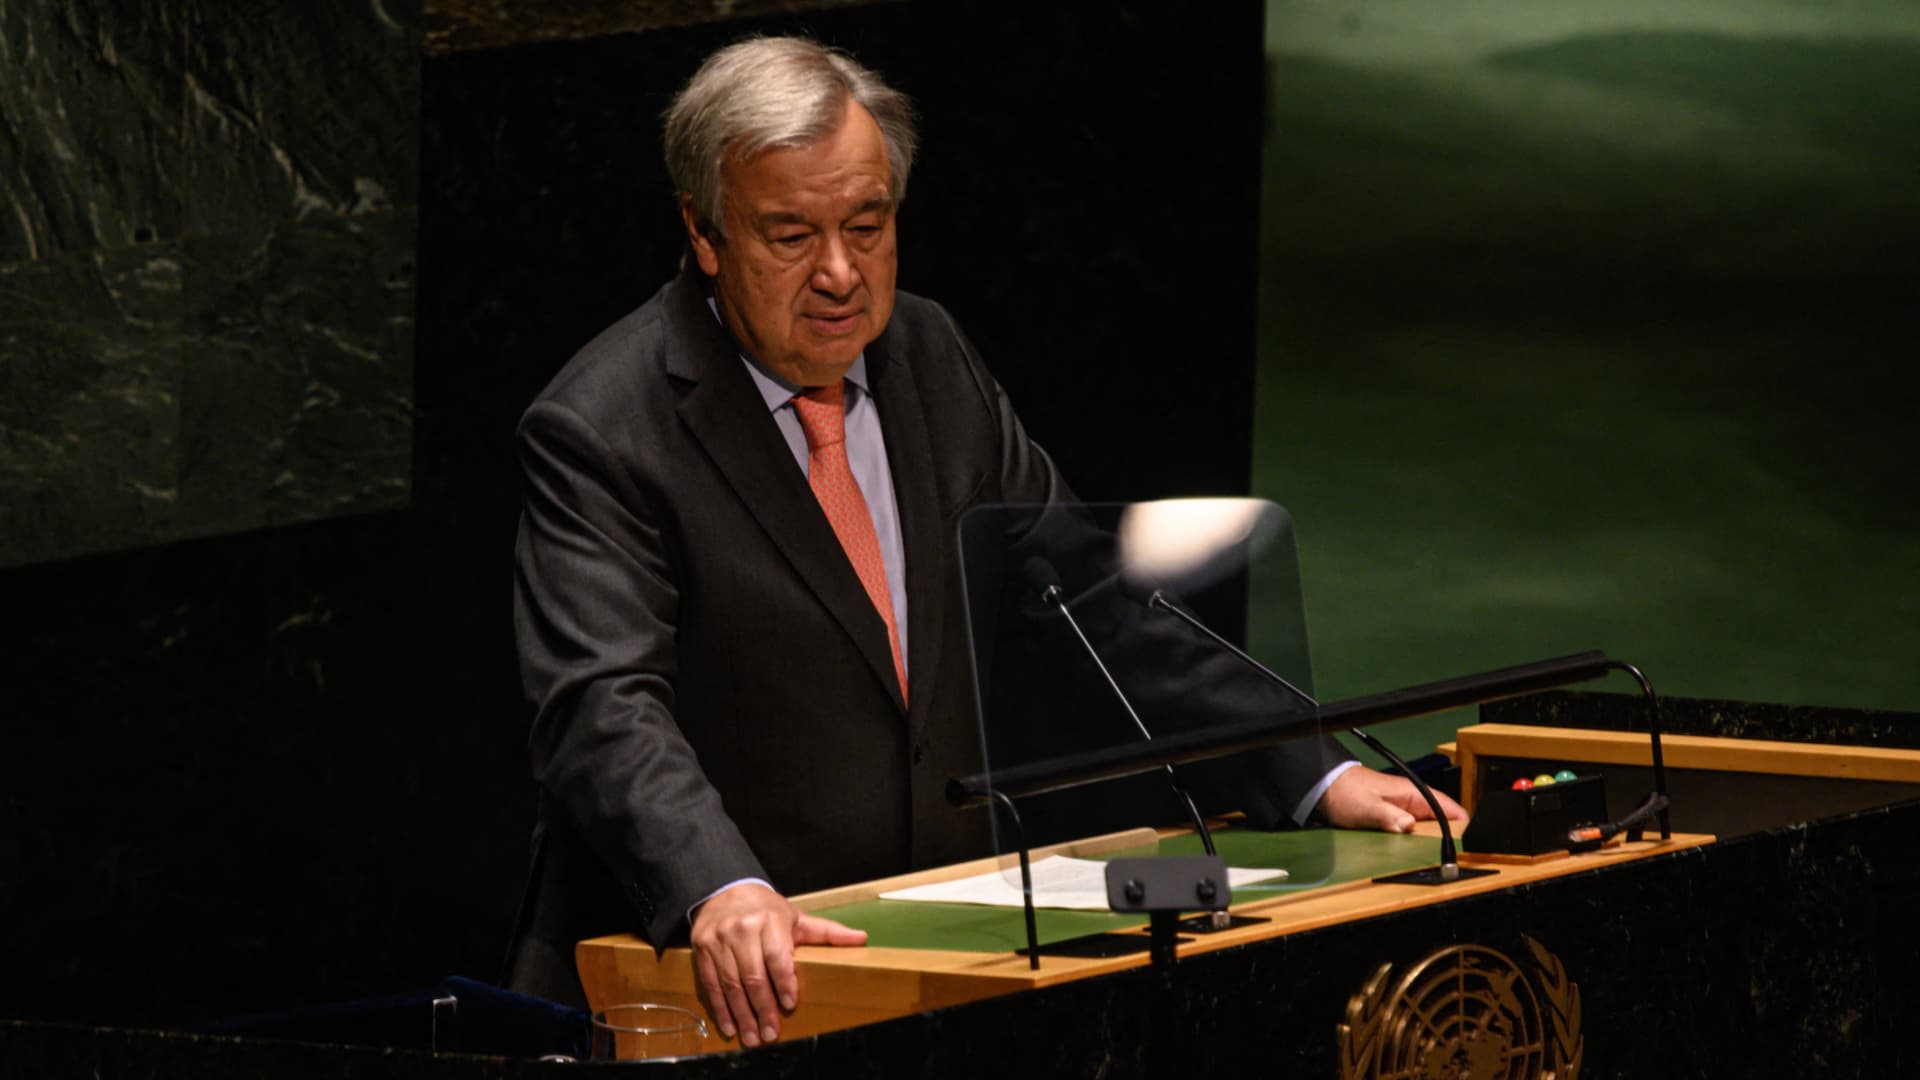 United Nations Secretary General Antonio Guterres speaks during the 2022 Review Conference of the Parties to the Treaty on the Non-Proliferation of Nuclear Weapons at the United Nations in New York City on August 1, 2022.